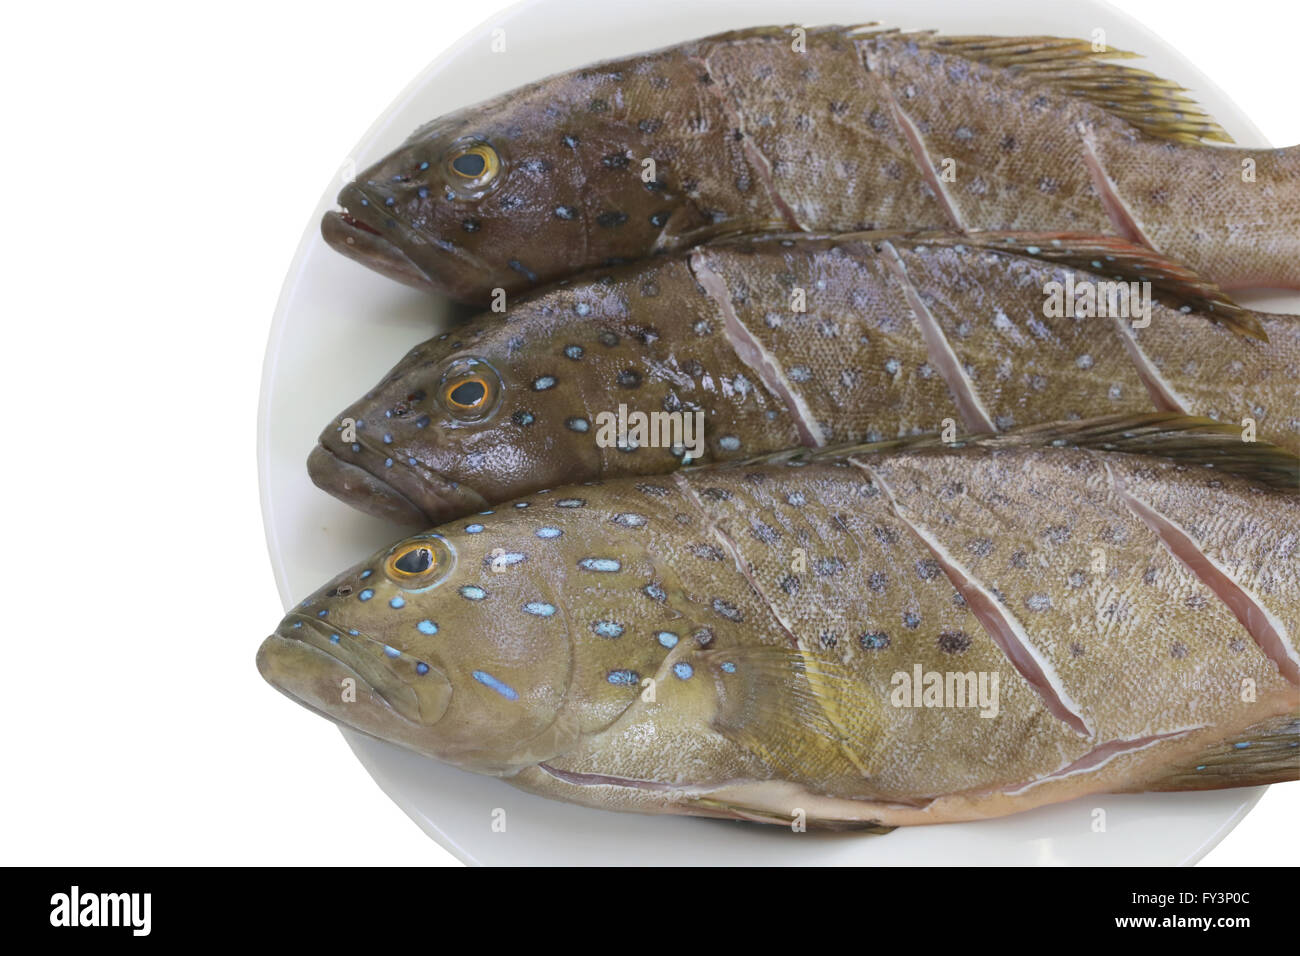 Fresh grouper fish (Leopard grouper) on dish for the ingredient in cooking and have clipping paths. Stock Photo